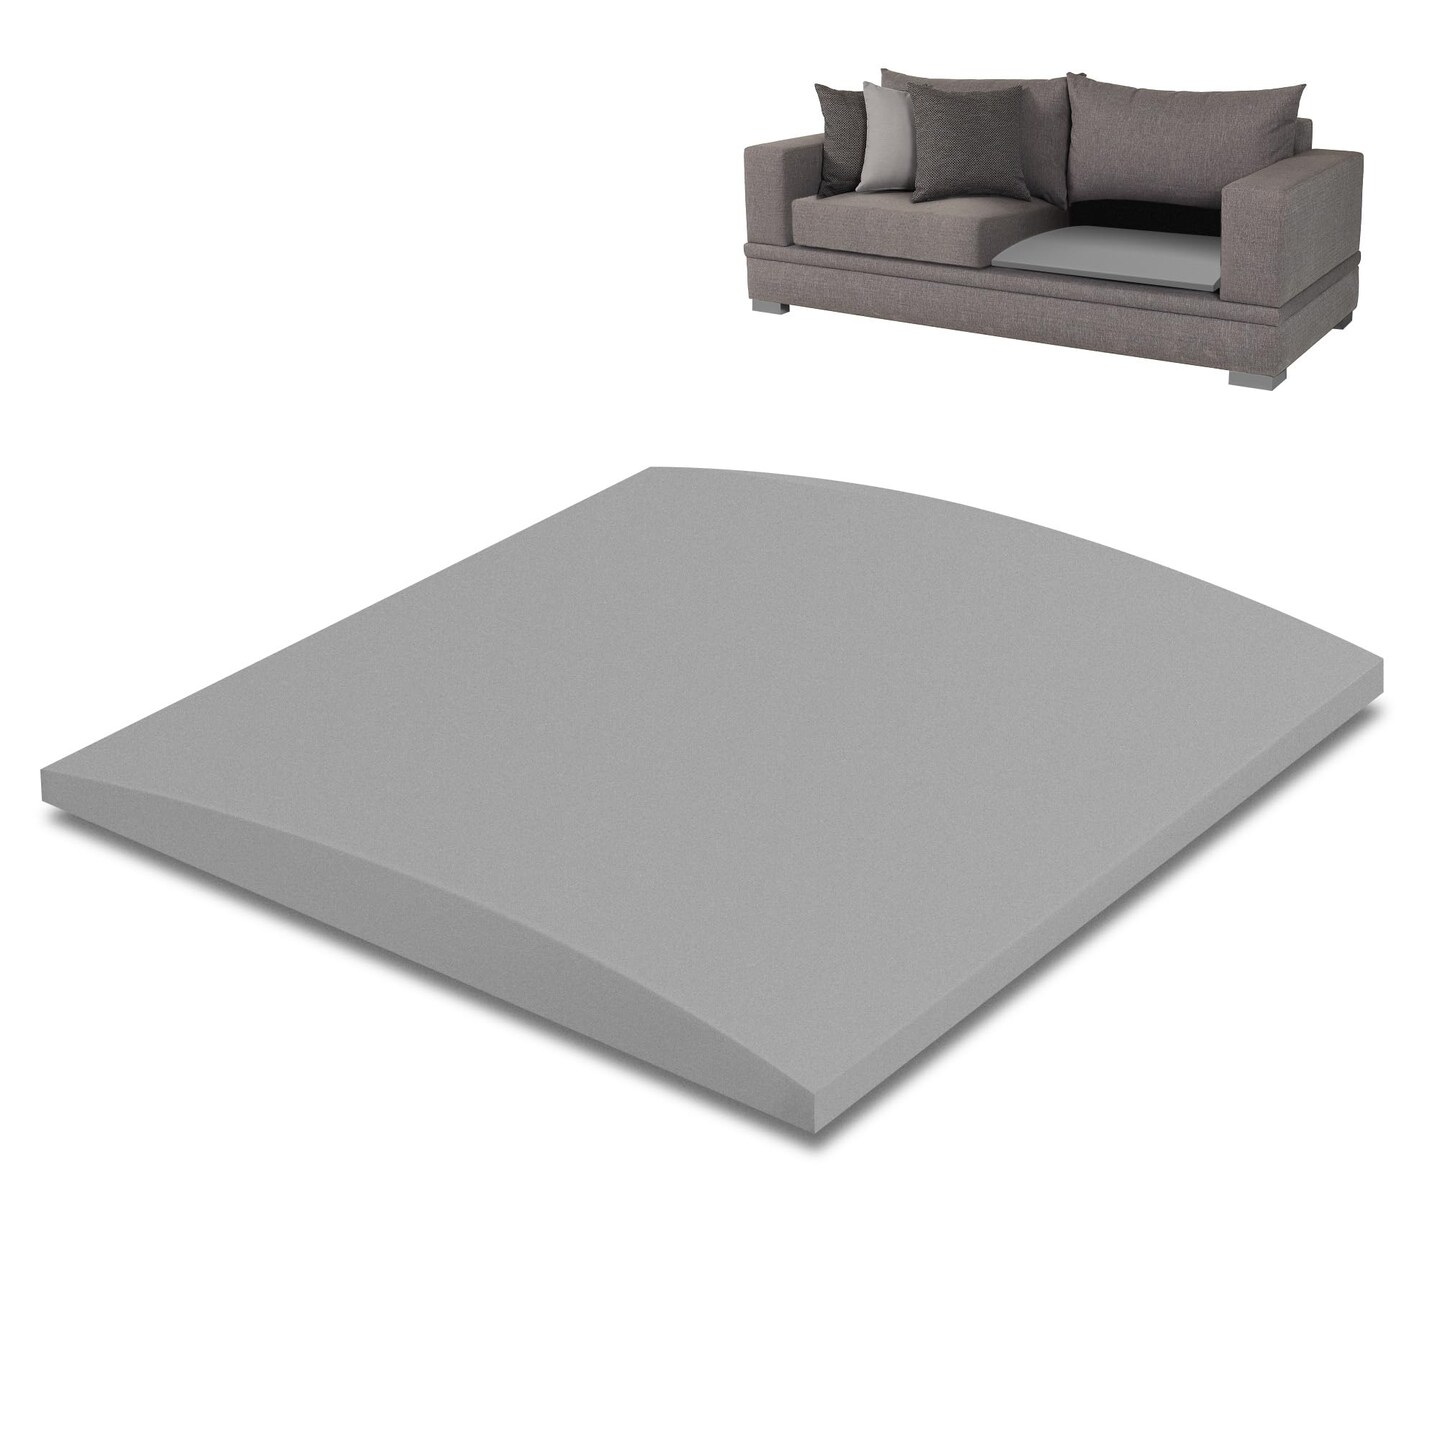 Replacement Foam for Sofa and Patio Cushions